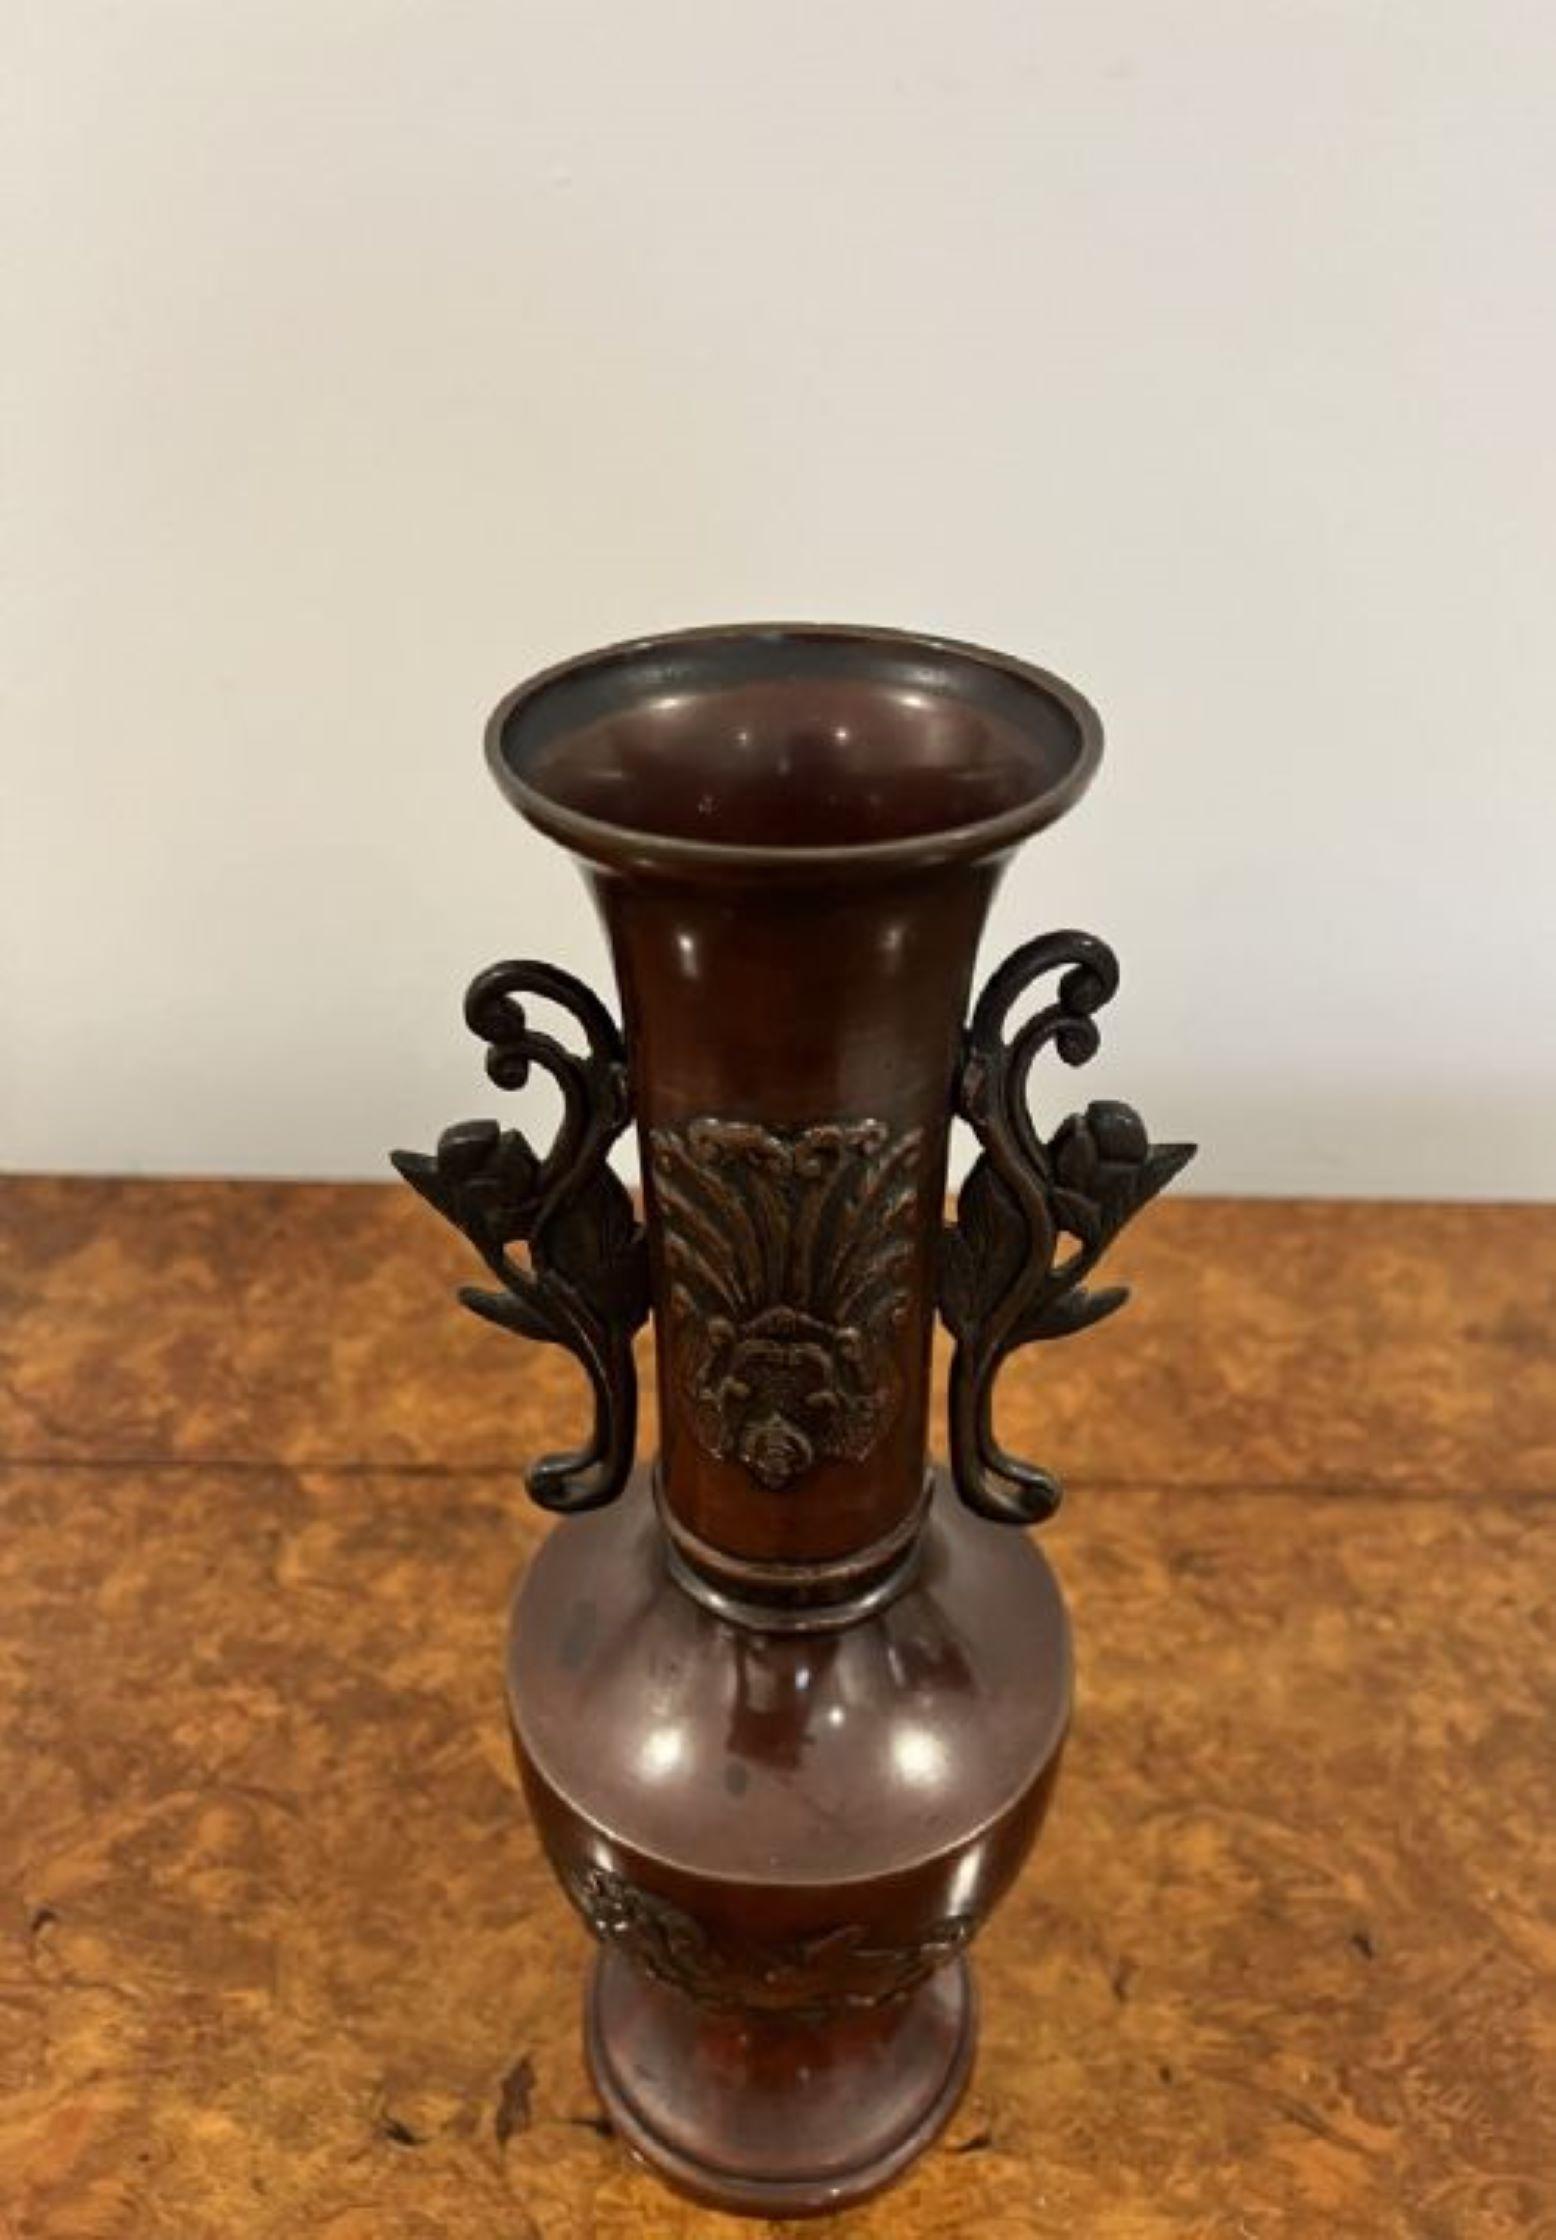 Quality pair of antique Japanese twin handle bronze vases having a quality pair of Japanese bronze vases decorated with flowers, birds and foliage with twin flower handles to the sides 
